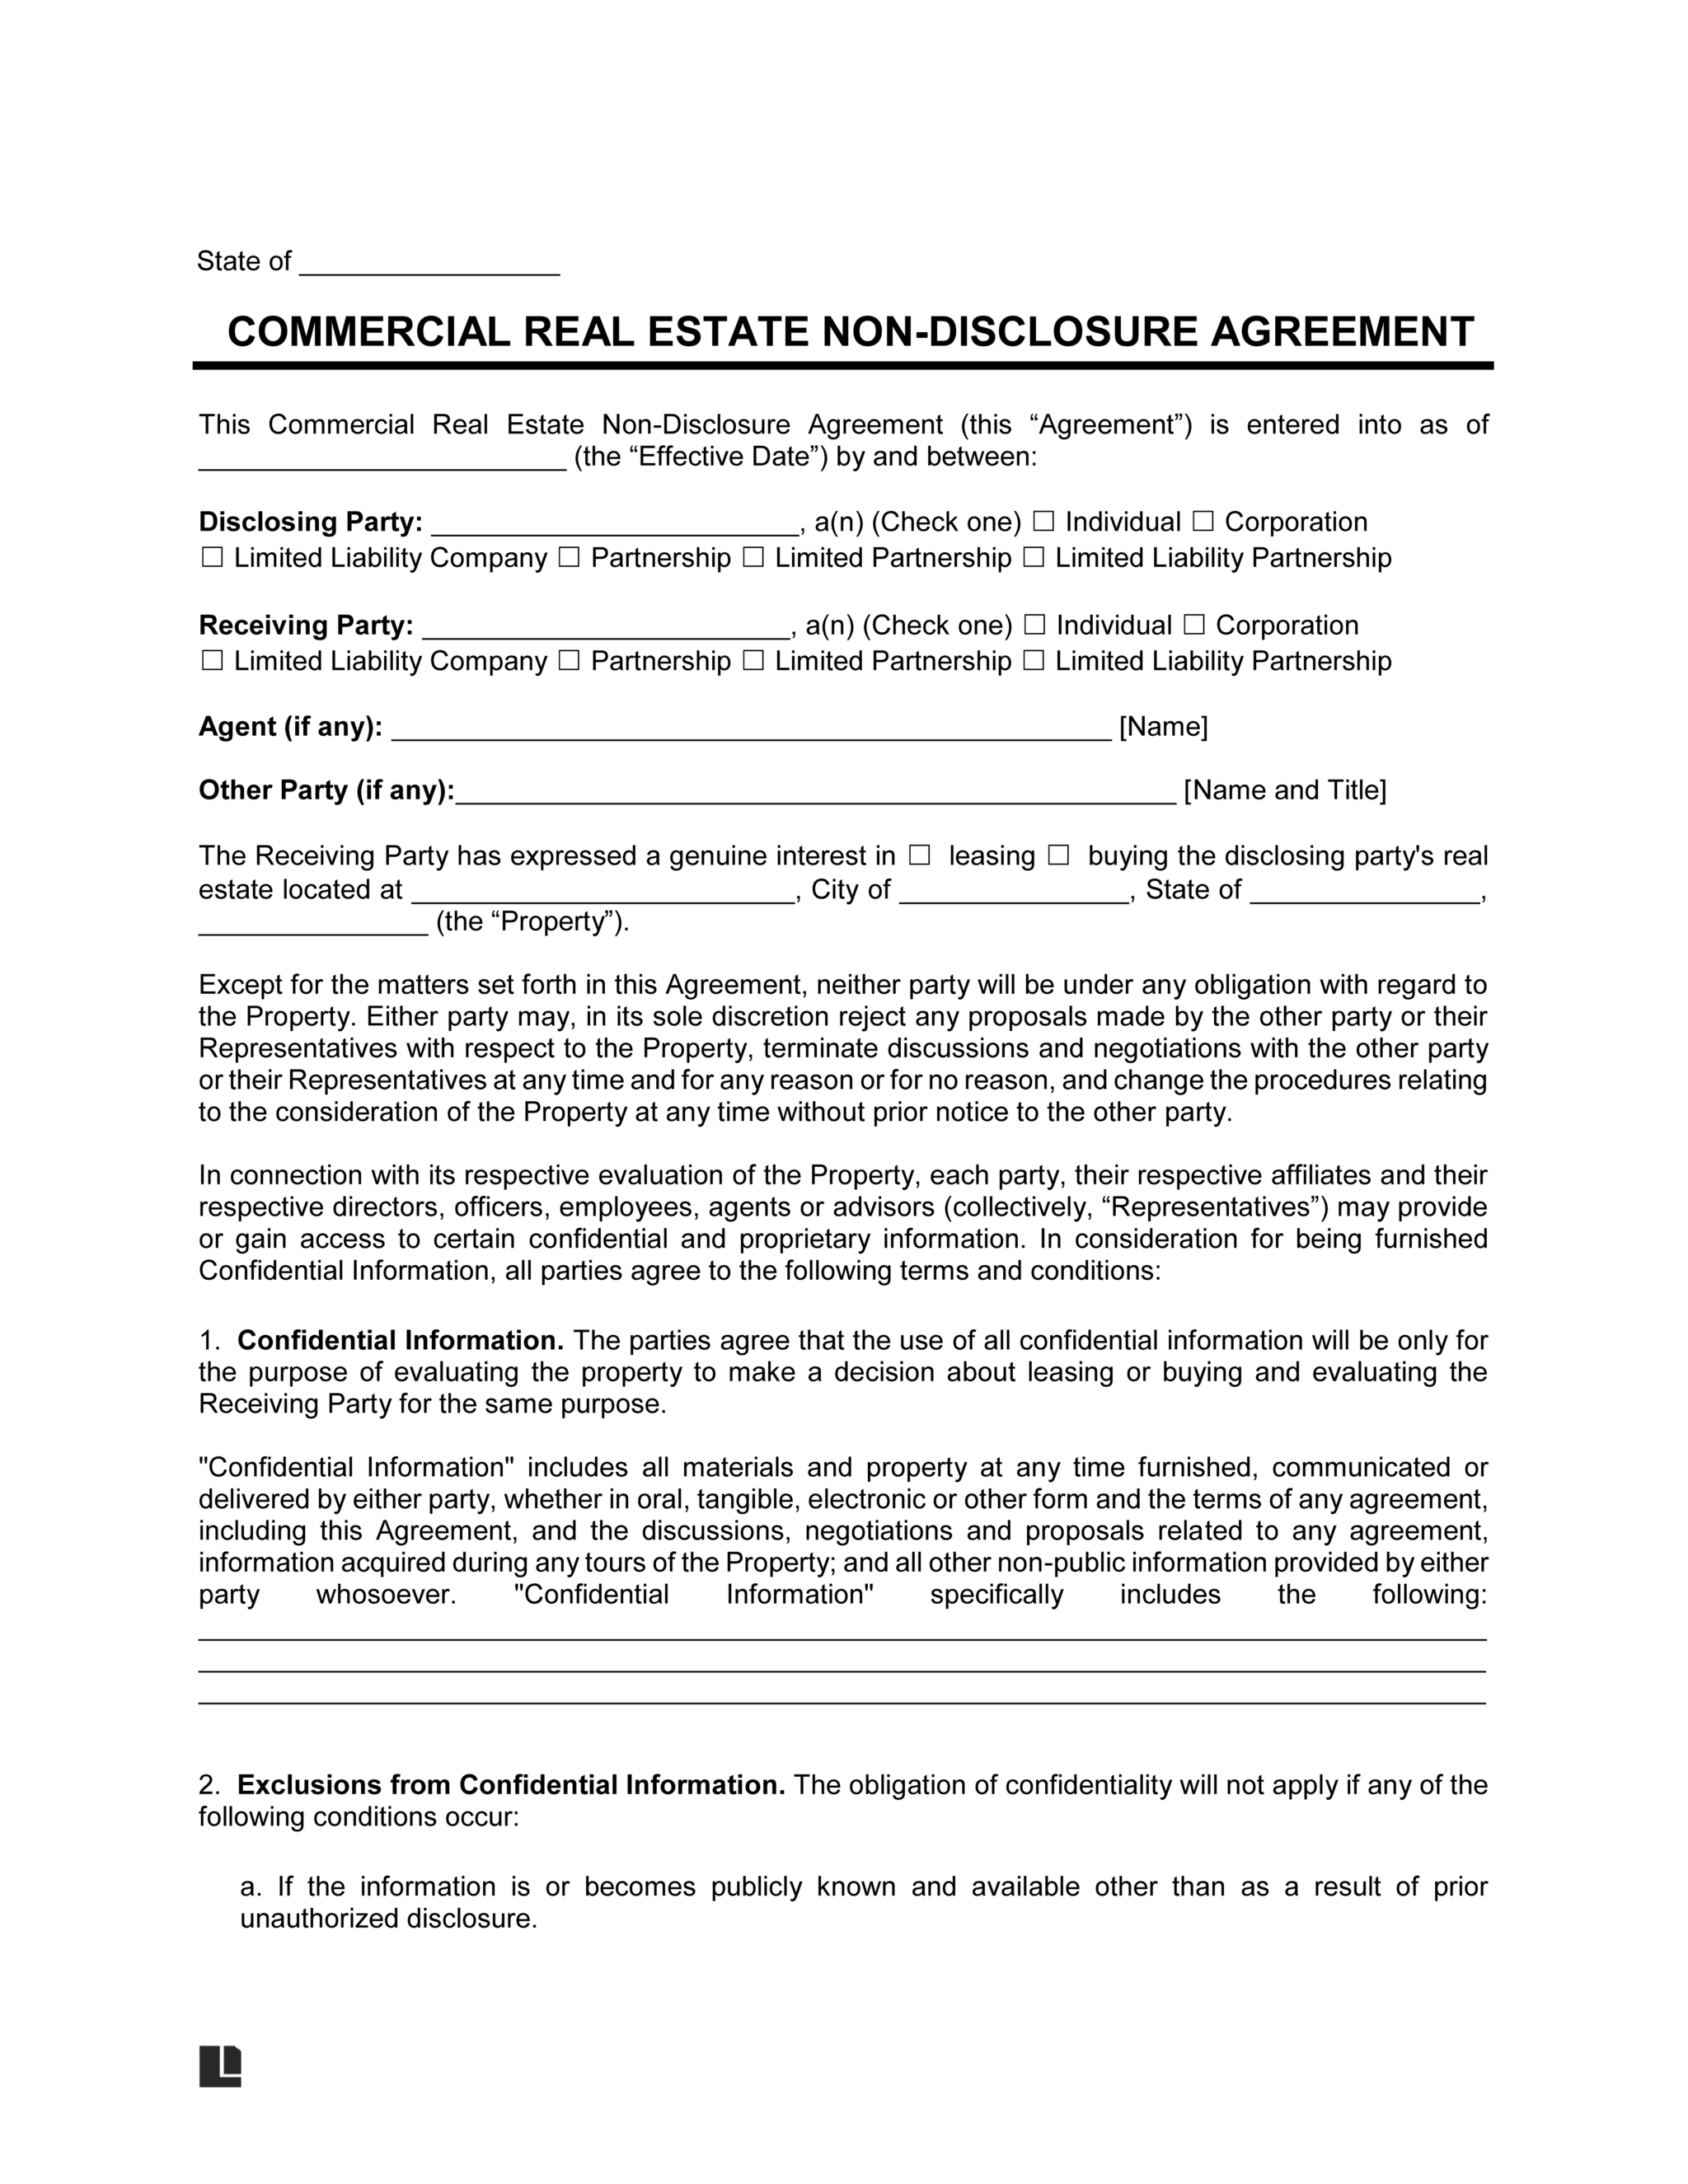 Commercial Real Estate Non-Disclosure Agreement (NDA)